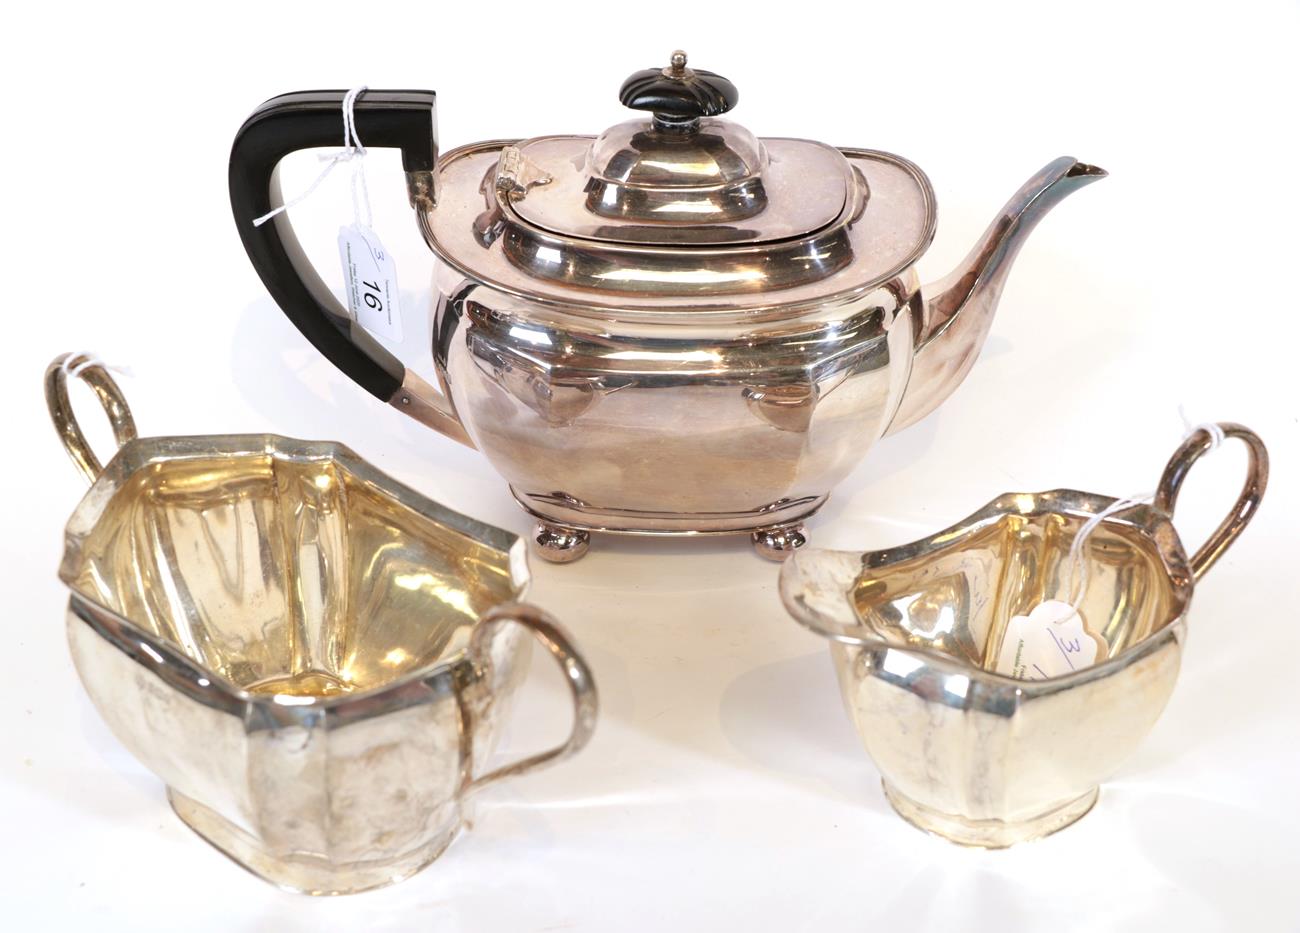 Lot 16 - A George V Silver Teapot and a Similar Cream-Jug and Sugar-Bowl, The Teapot, by Henry Atkin,...